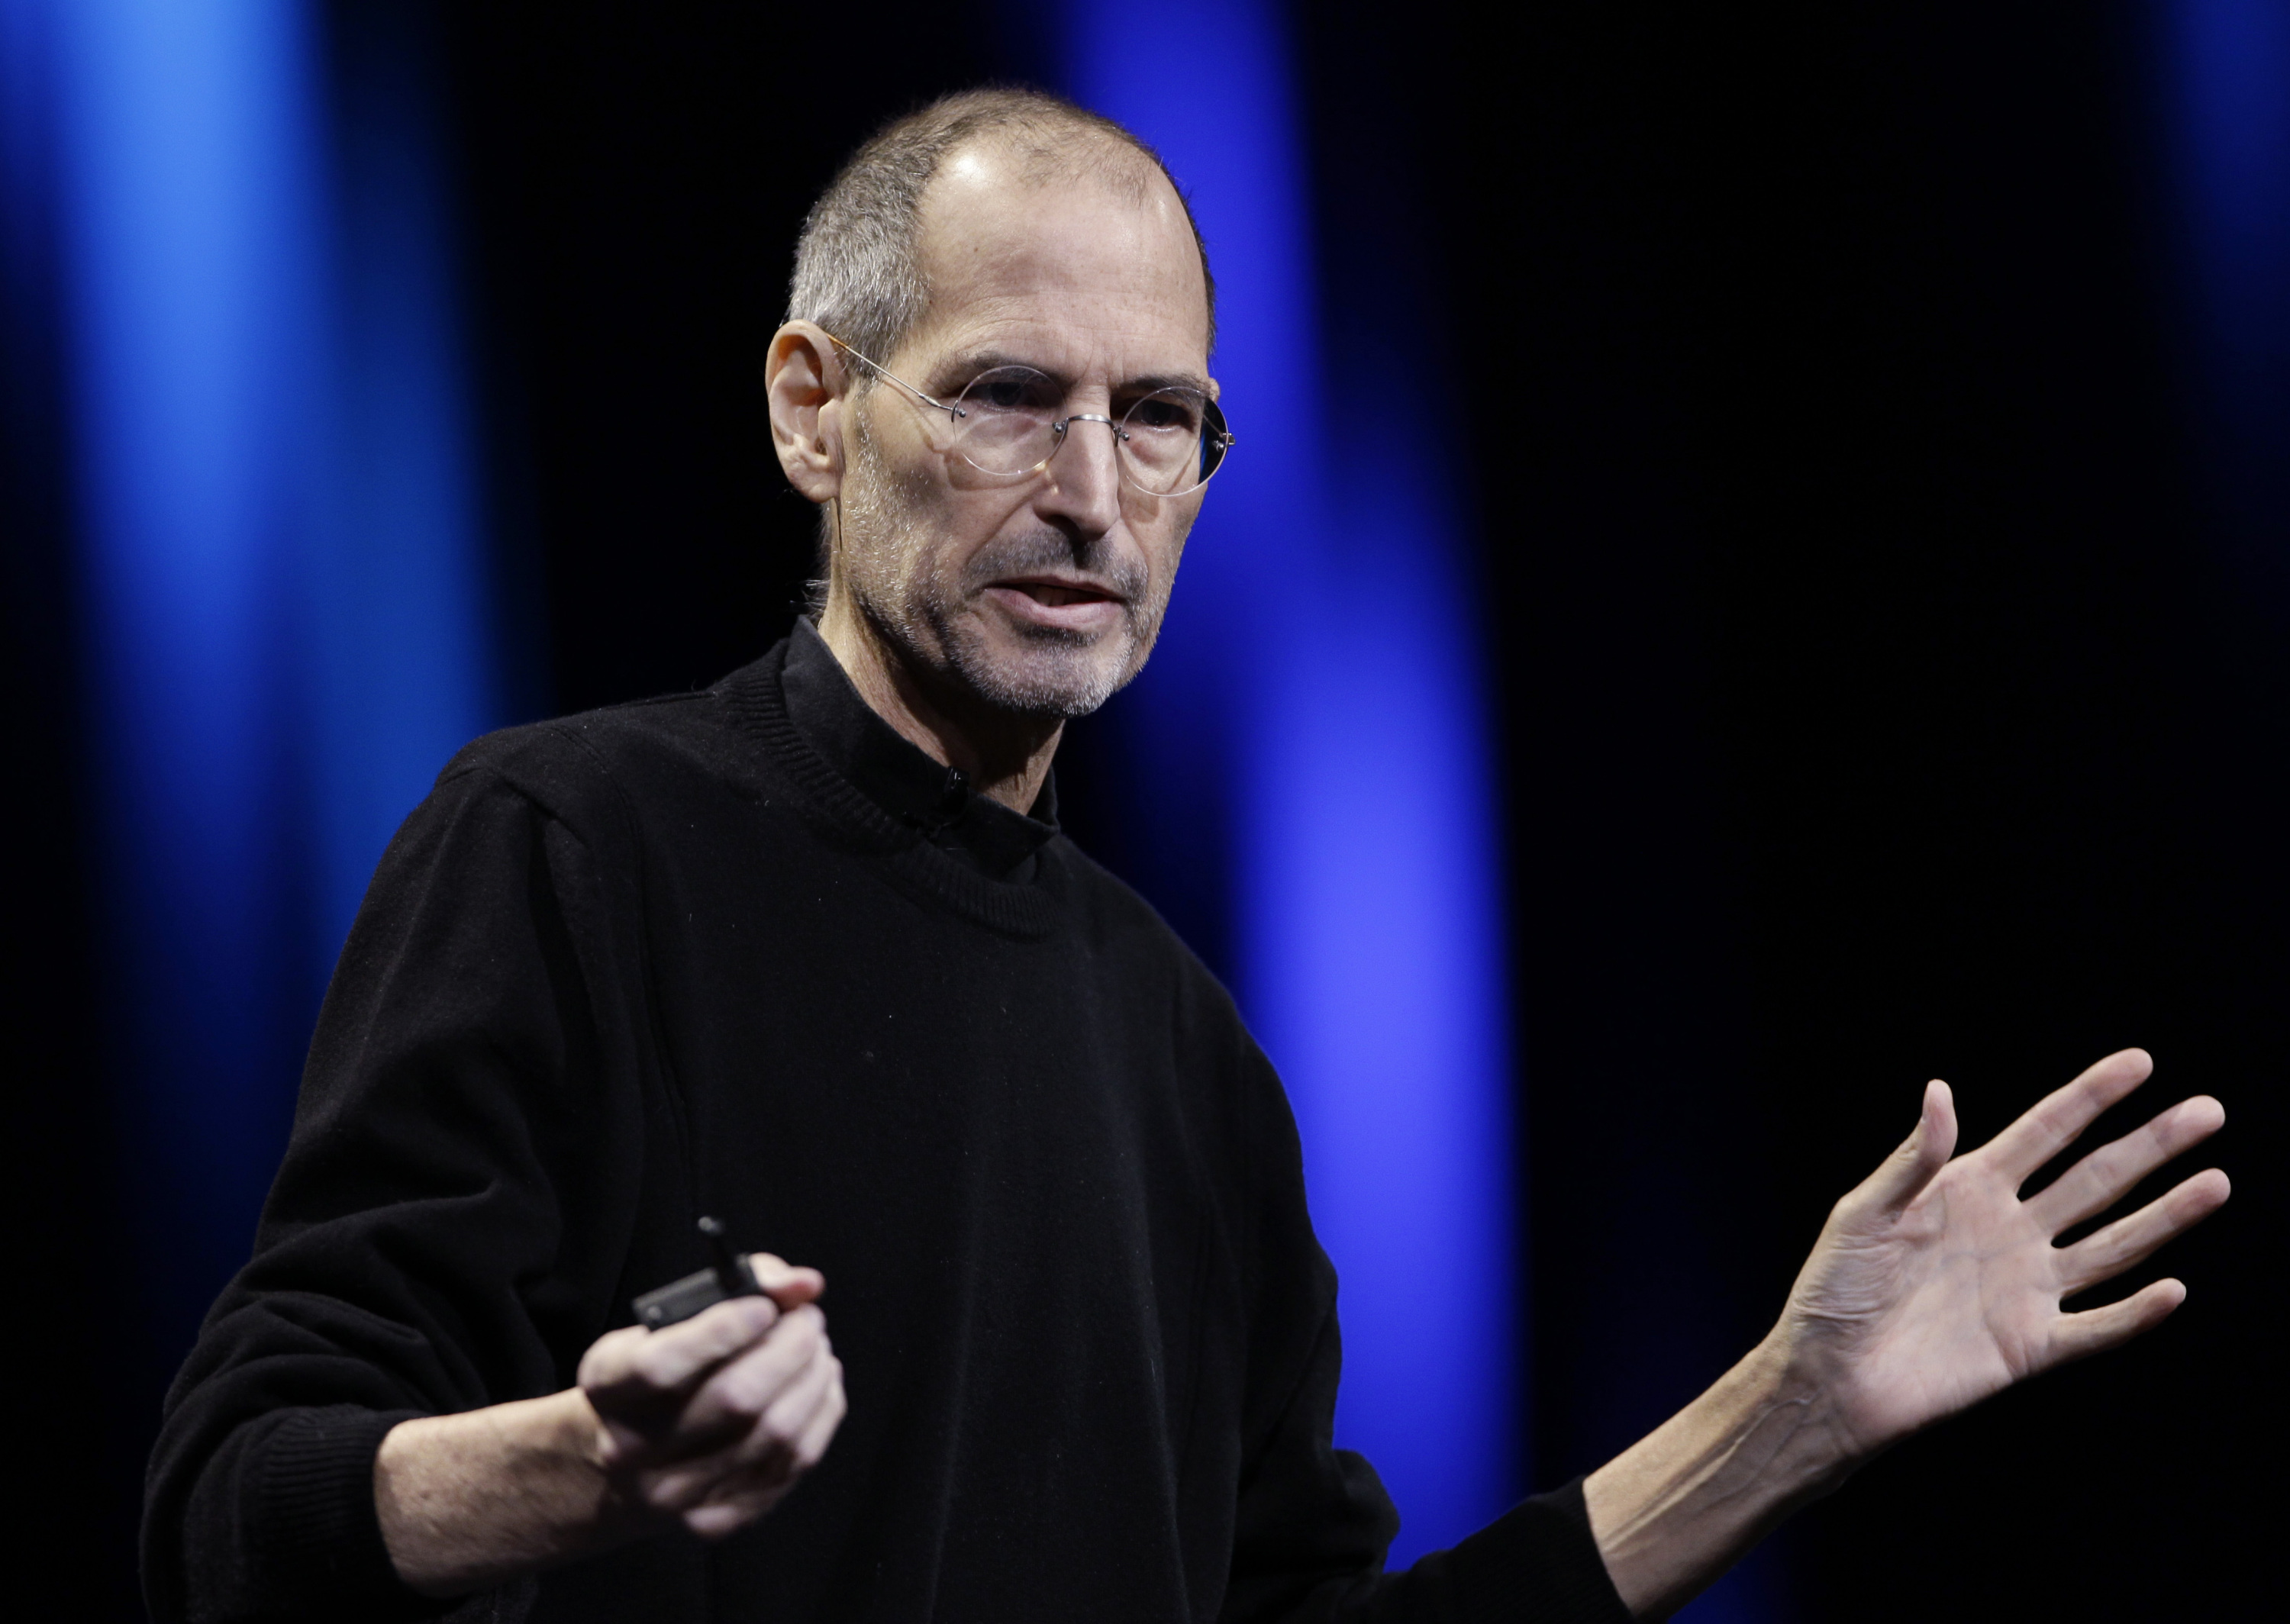 Steve Jobs during a keynote address to the Apple Worldwide Developers Conference in San Francisco on June 6, 2011.